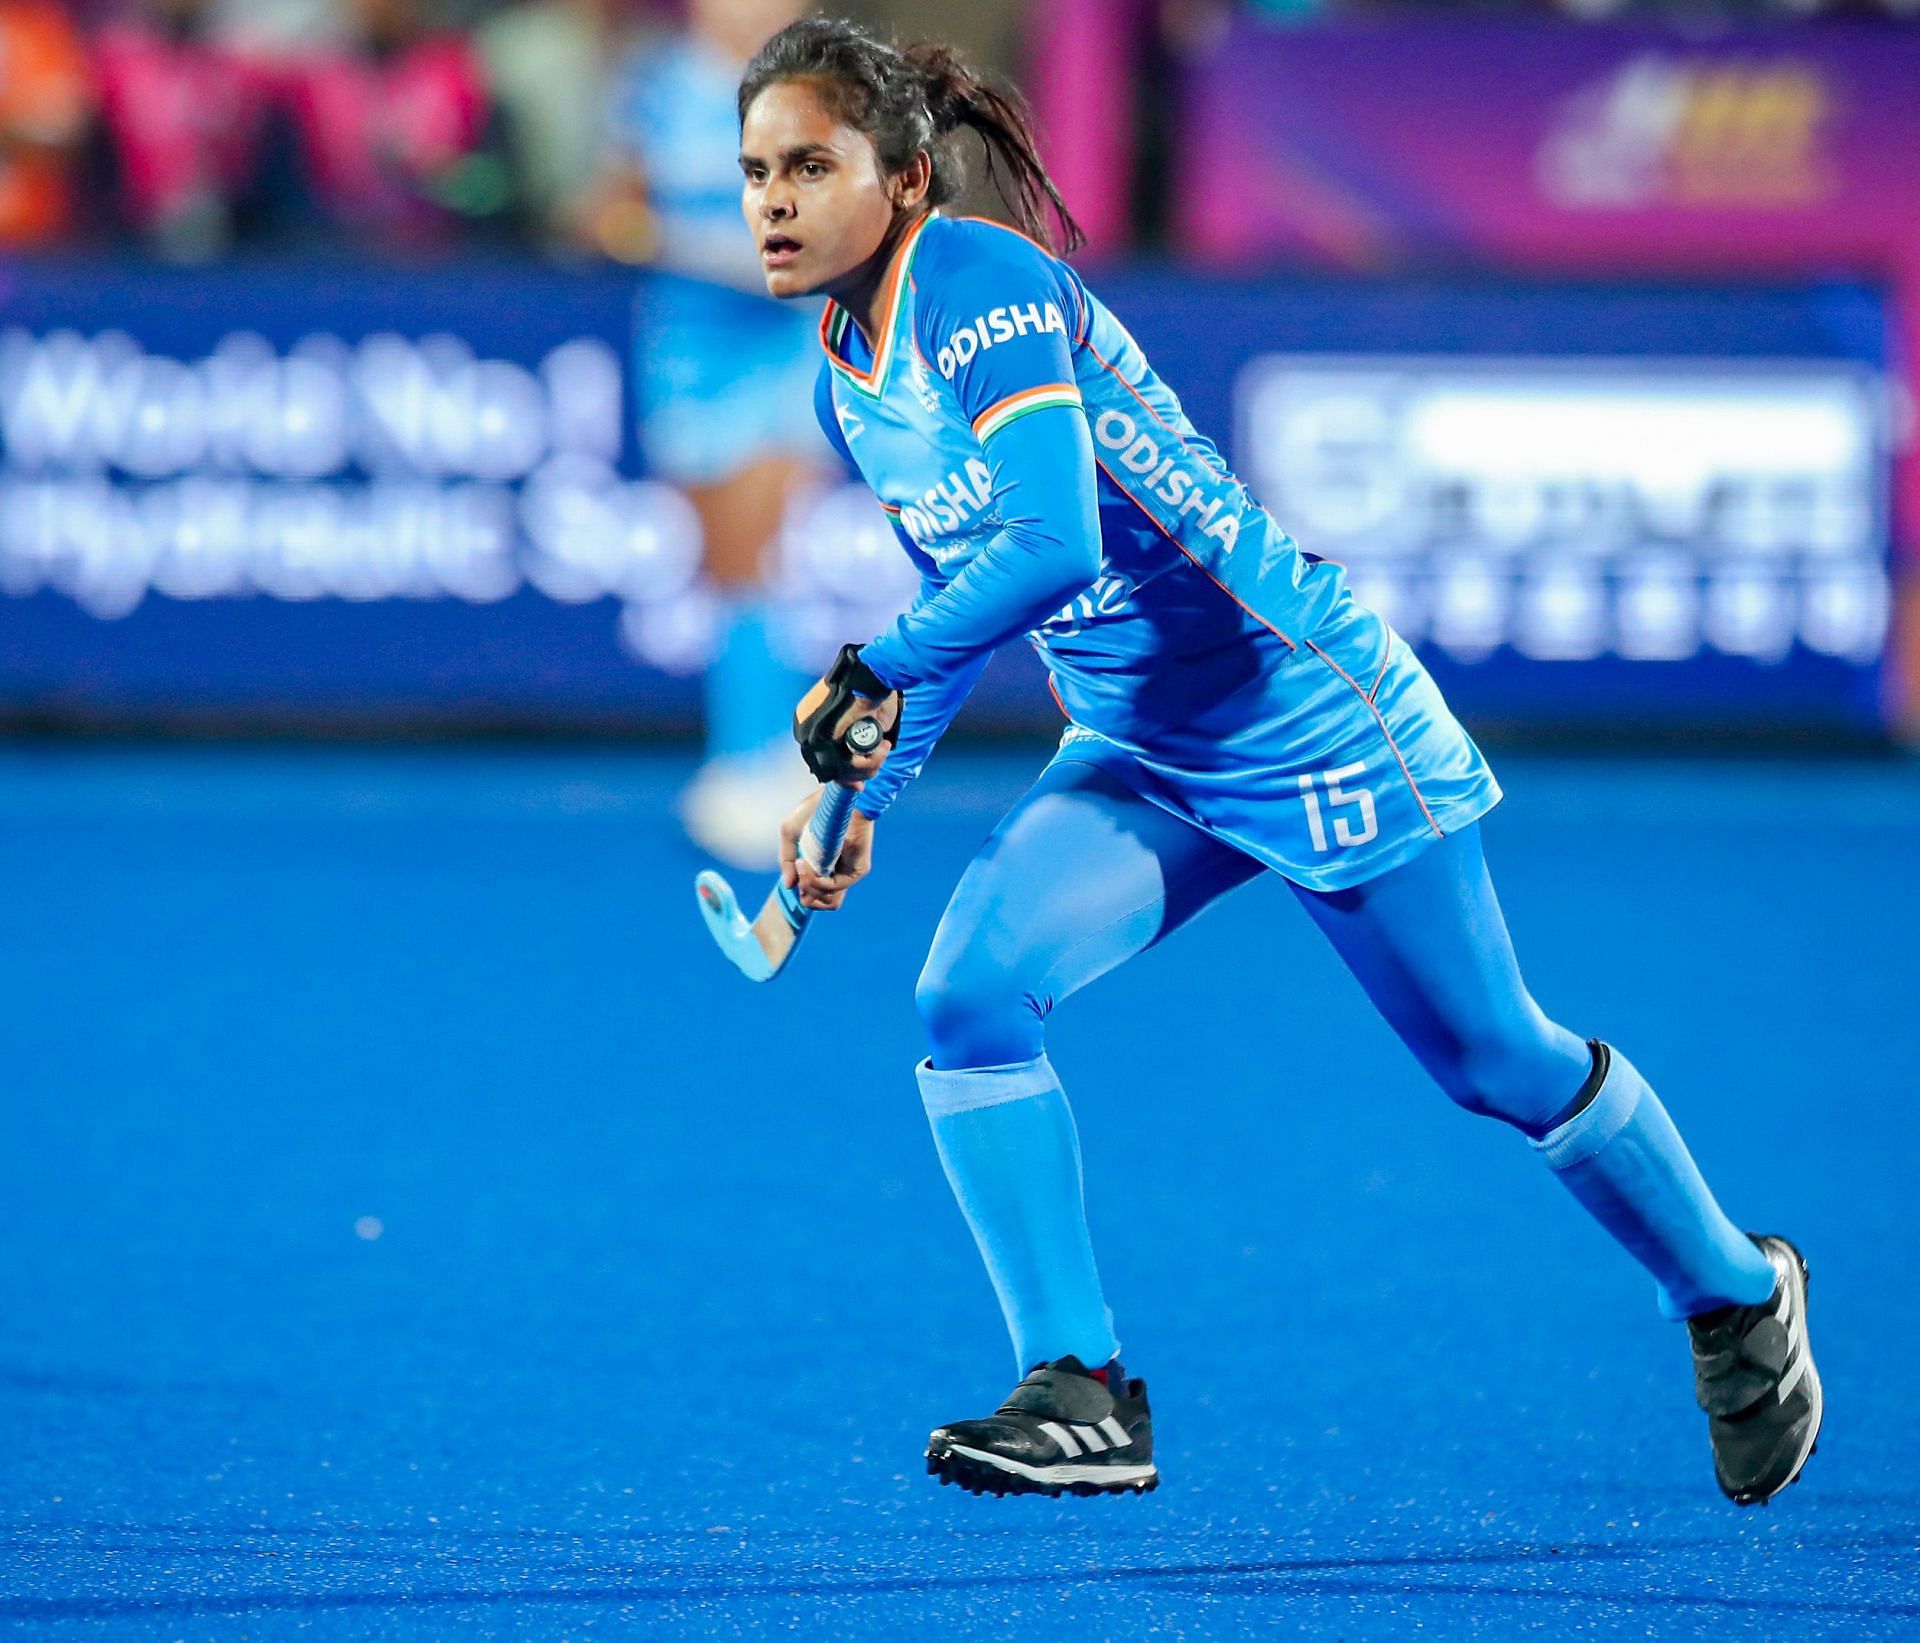 Nisha in action for India against Thailand (Image Credits: Hockey India)